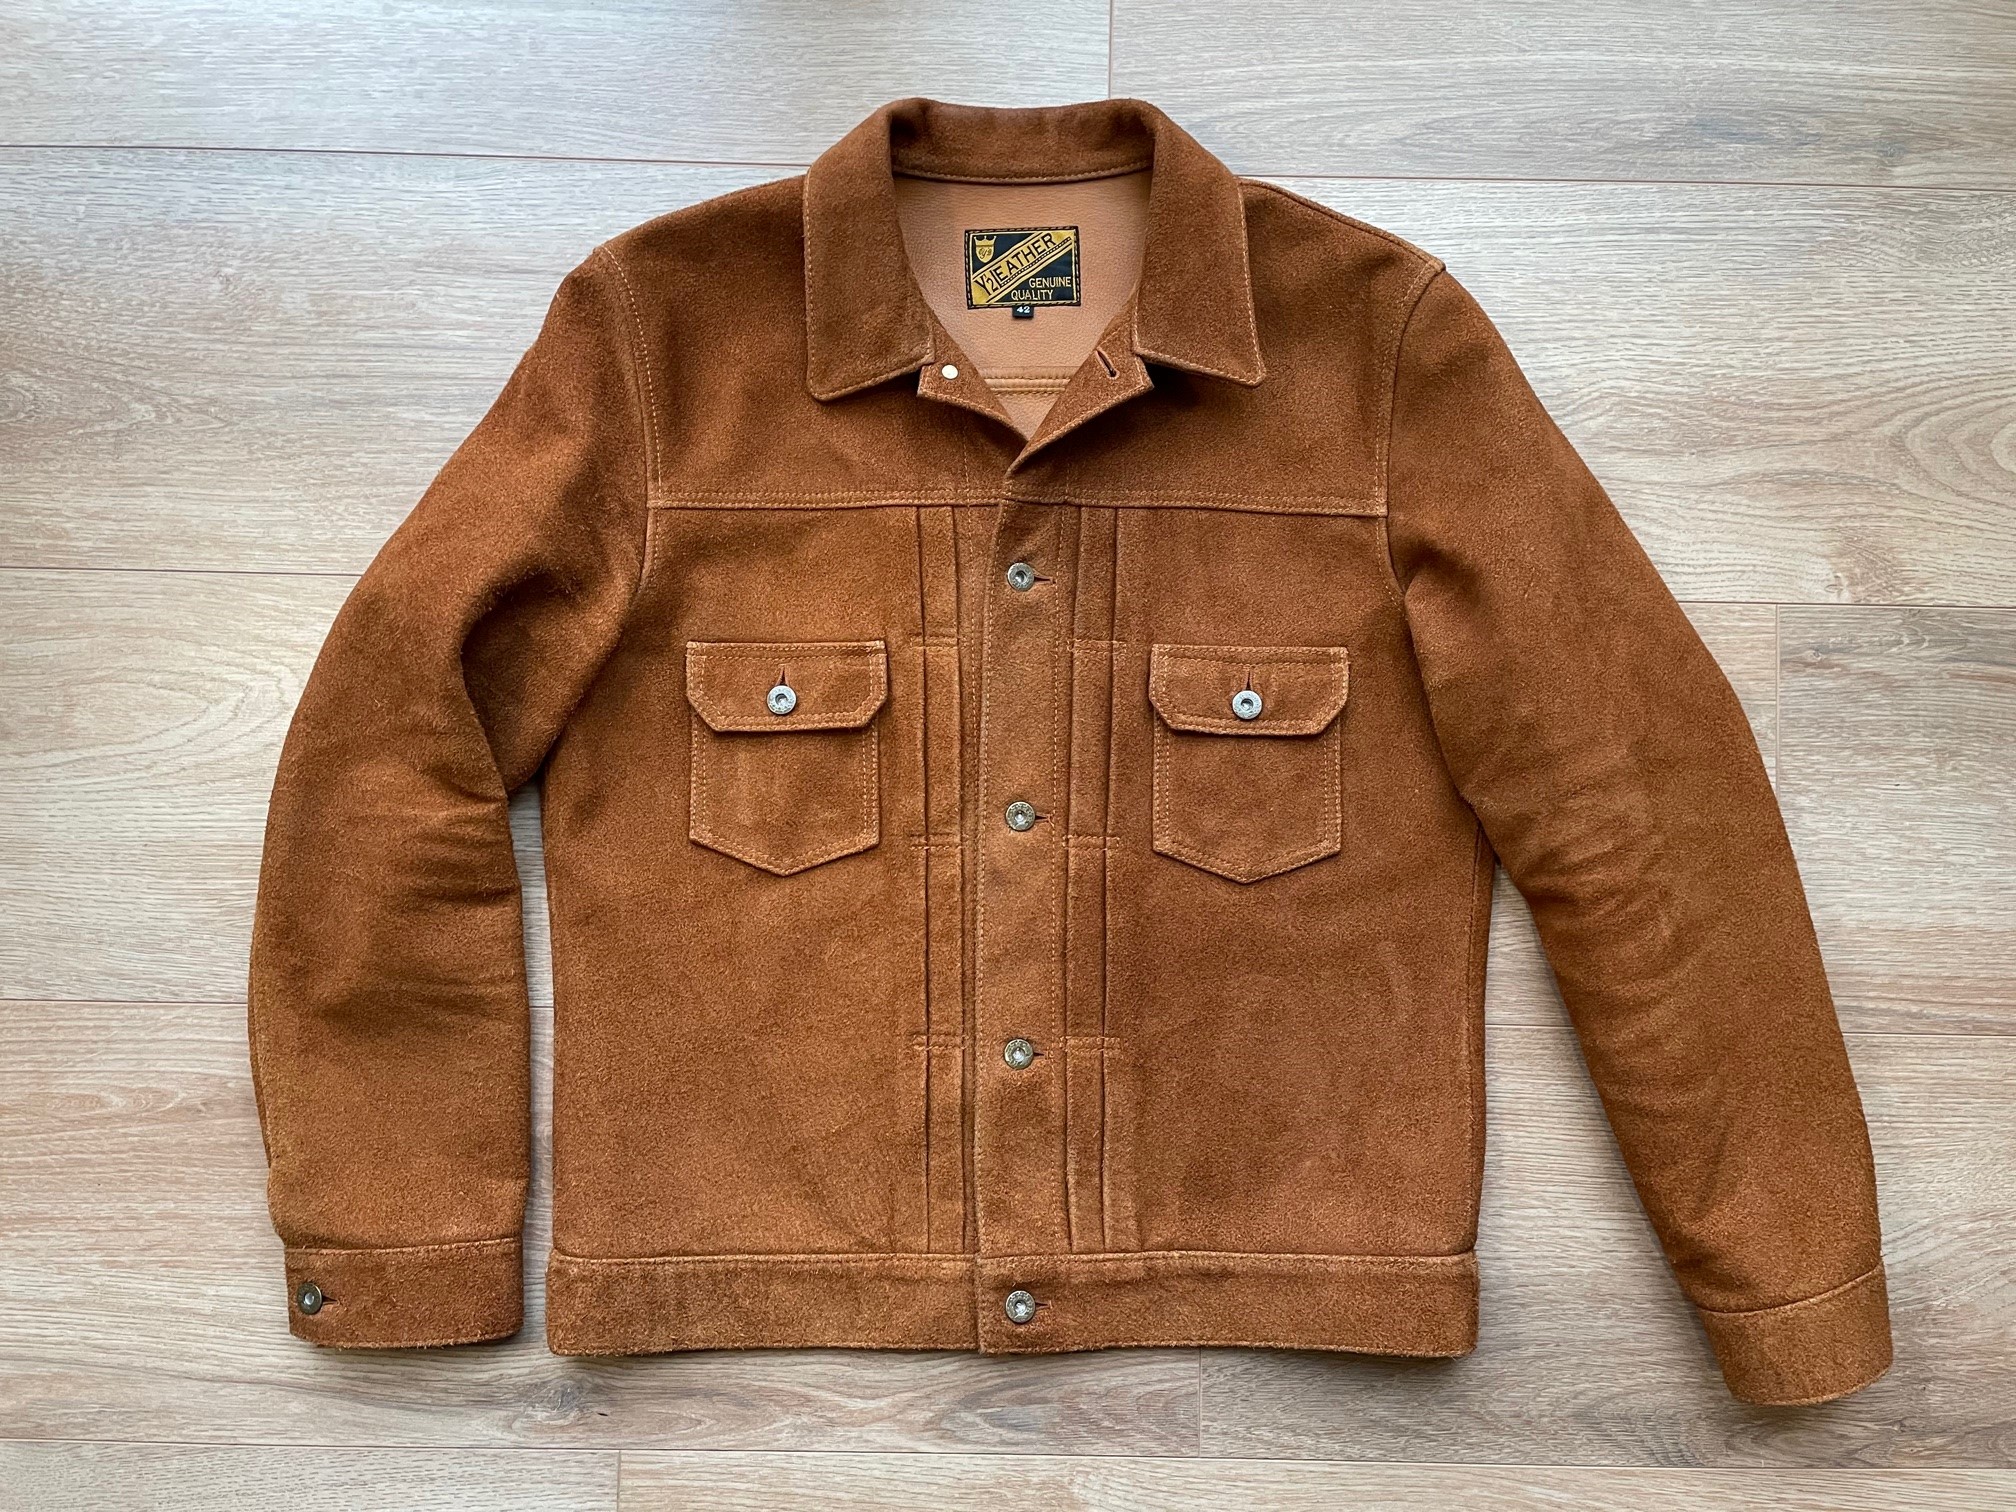 Type II jacket review x3. Denim, Roughout and waxed canvas/leather ...